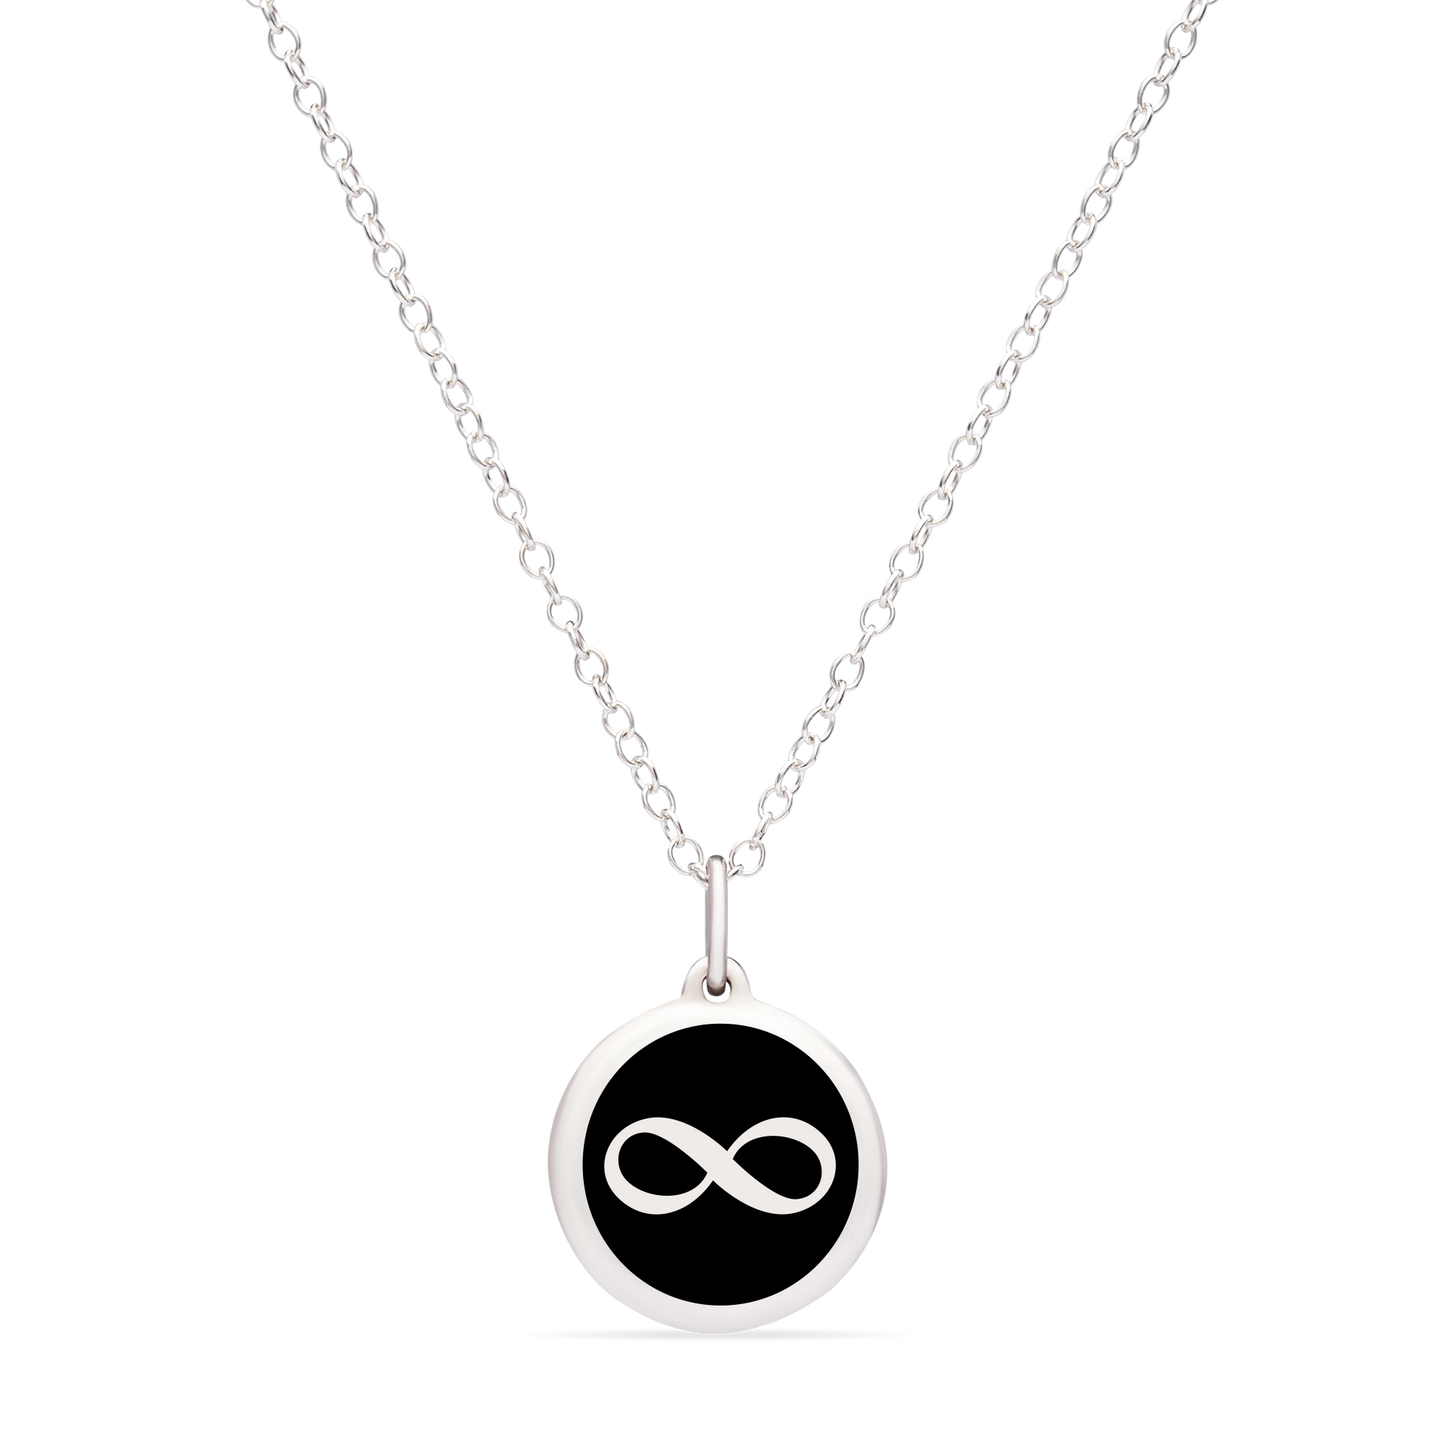 MINI INFINITY CHARM sterling silver with rhodium plate